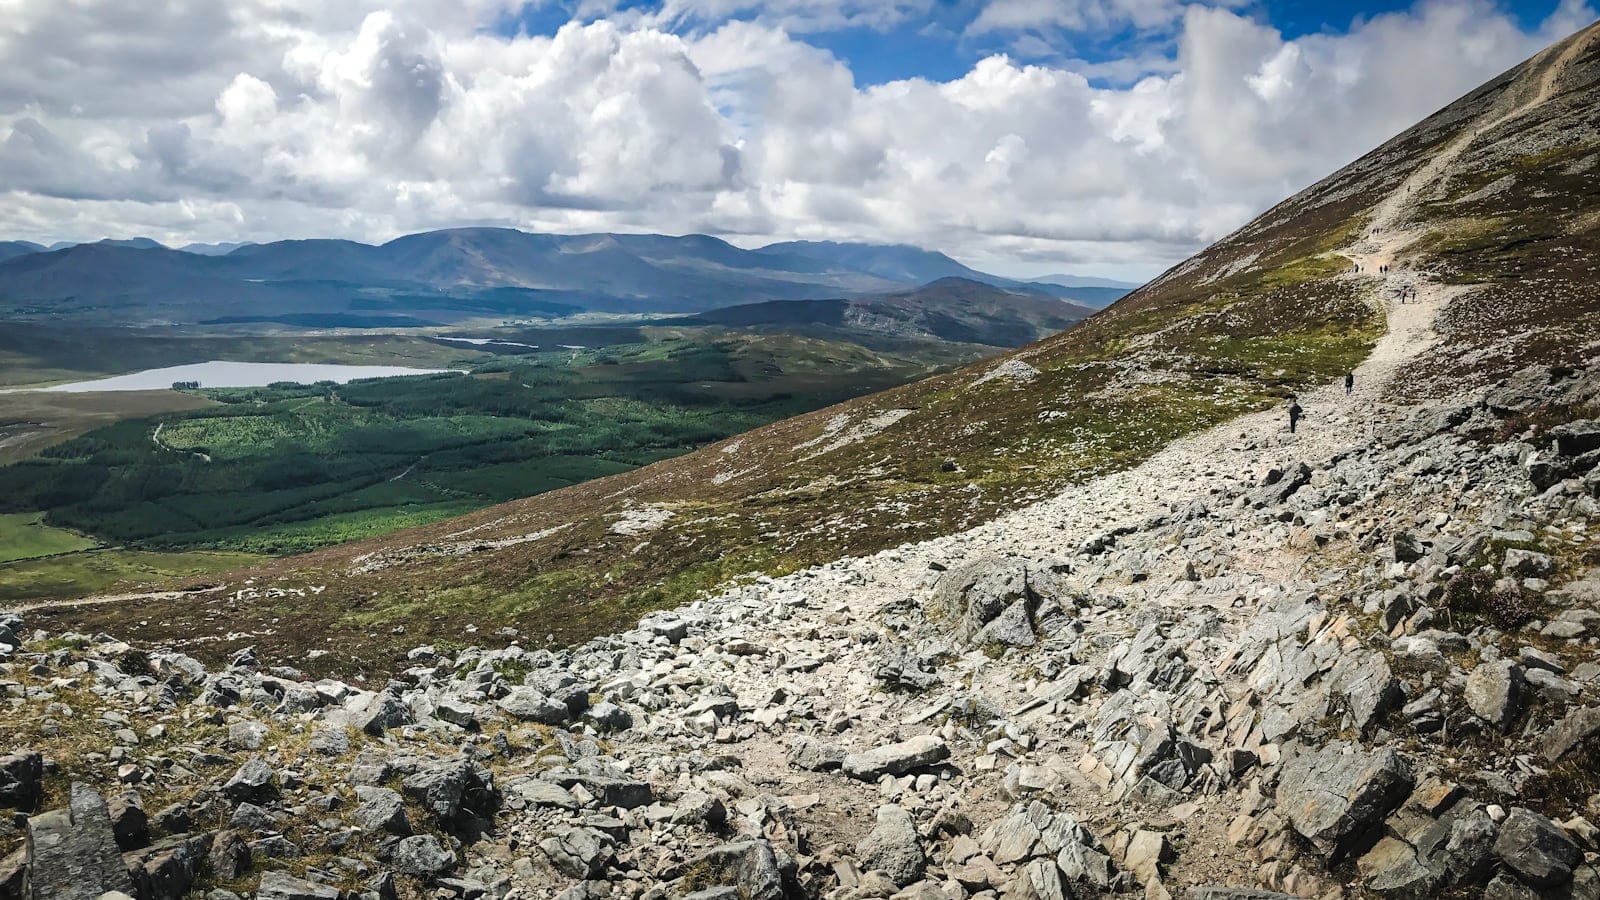 View from Croagh Patrick in County Mayo, Ireland